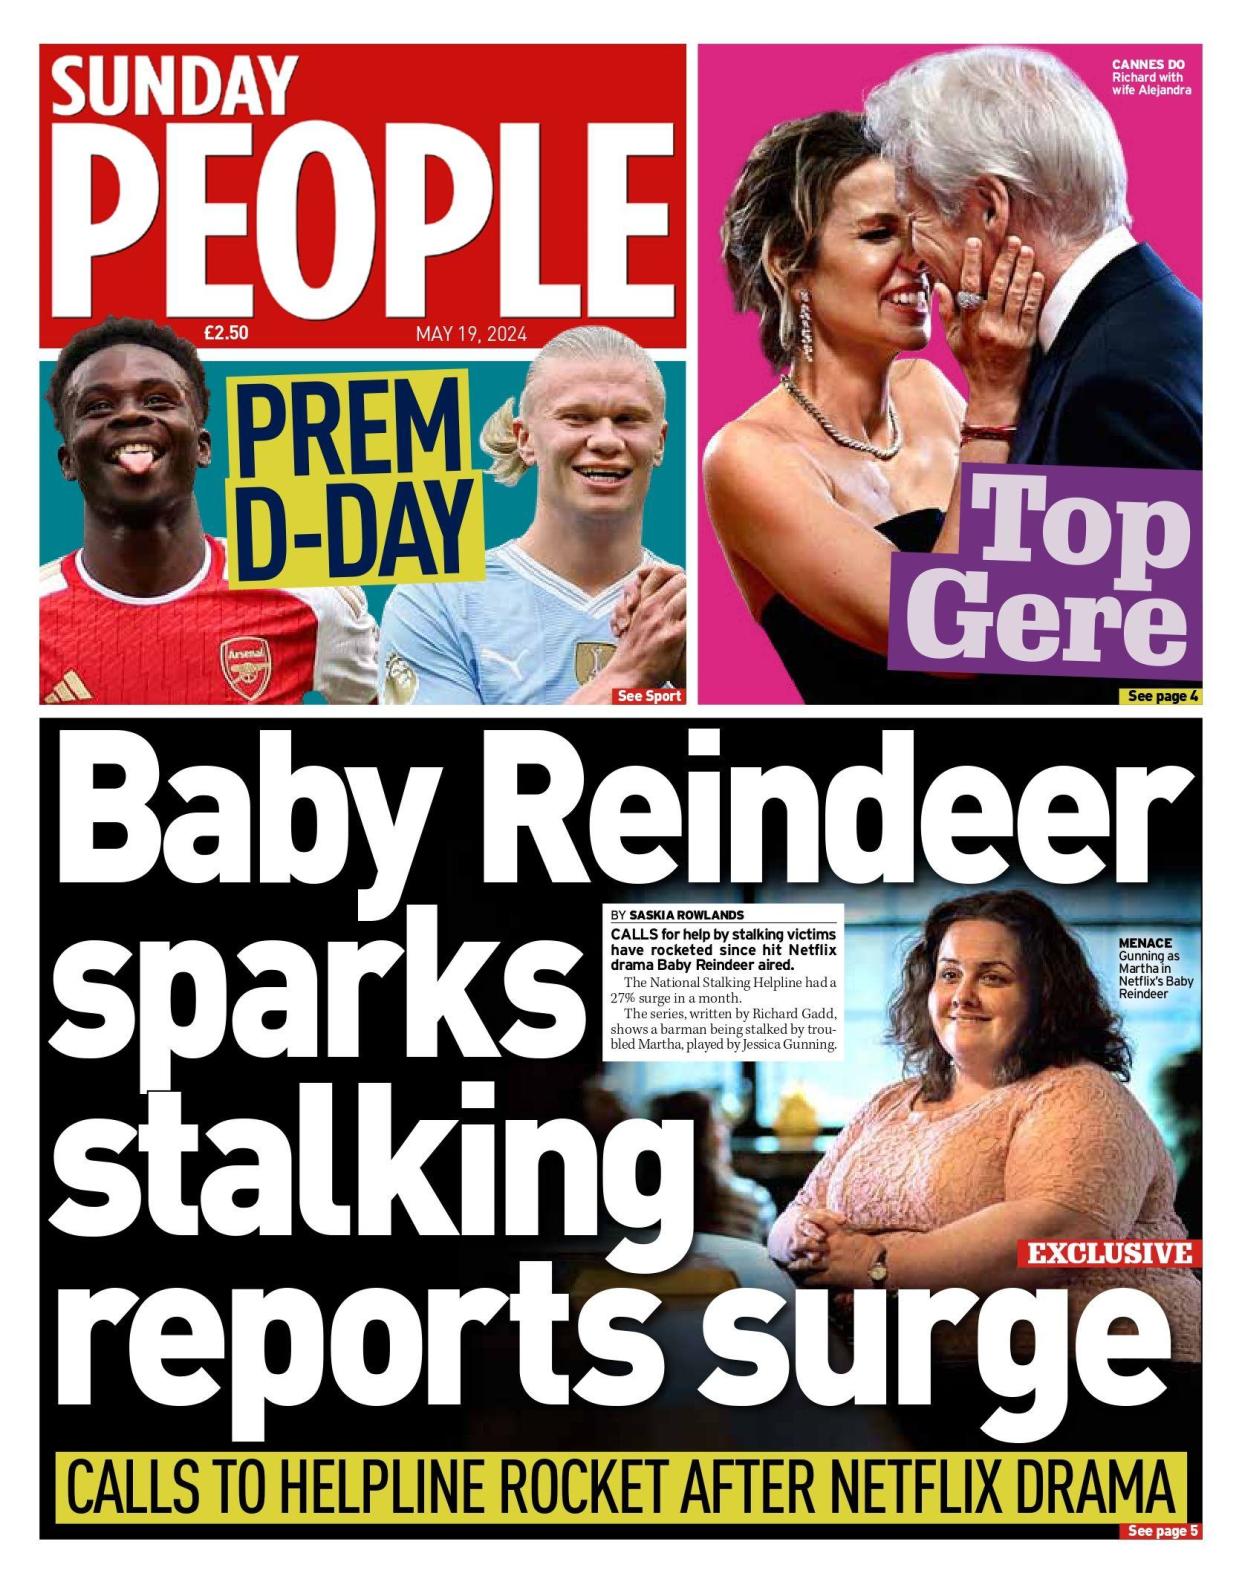 Sunday People: Baby Reindeer sparks stalking reports surge